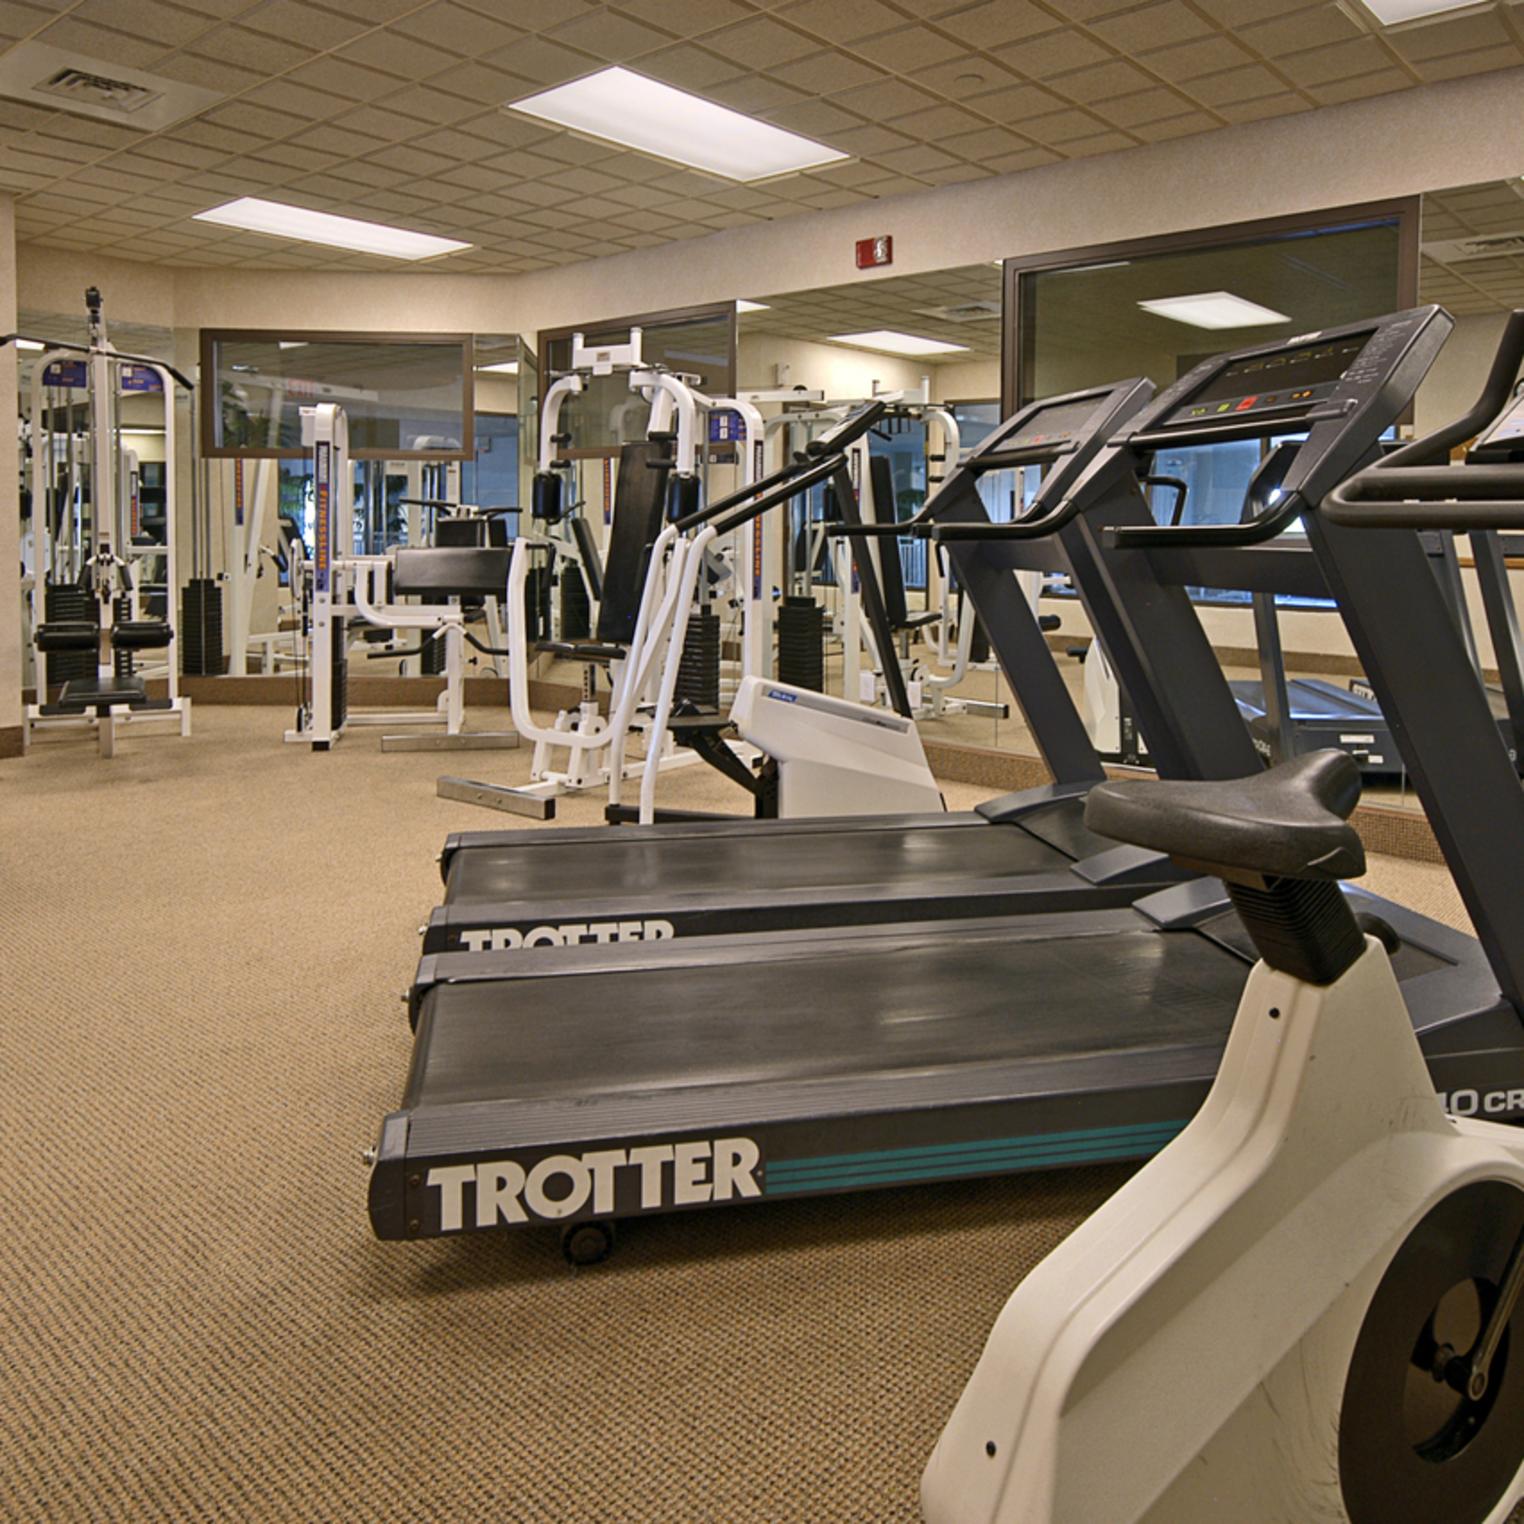 Stay on track with your exercise routine with our modern fitness center.